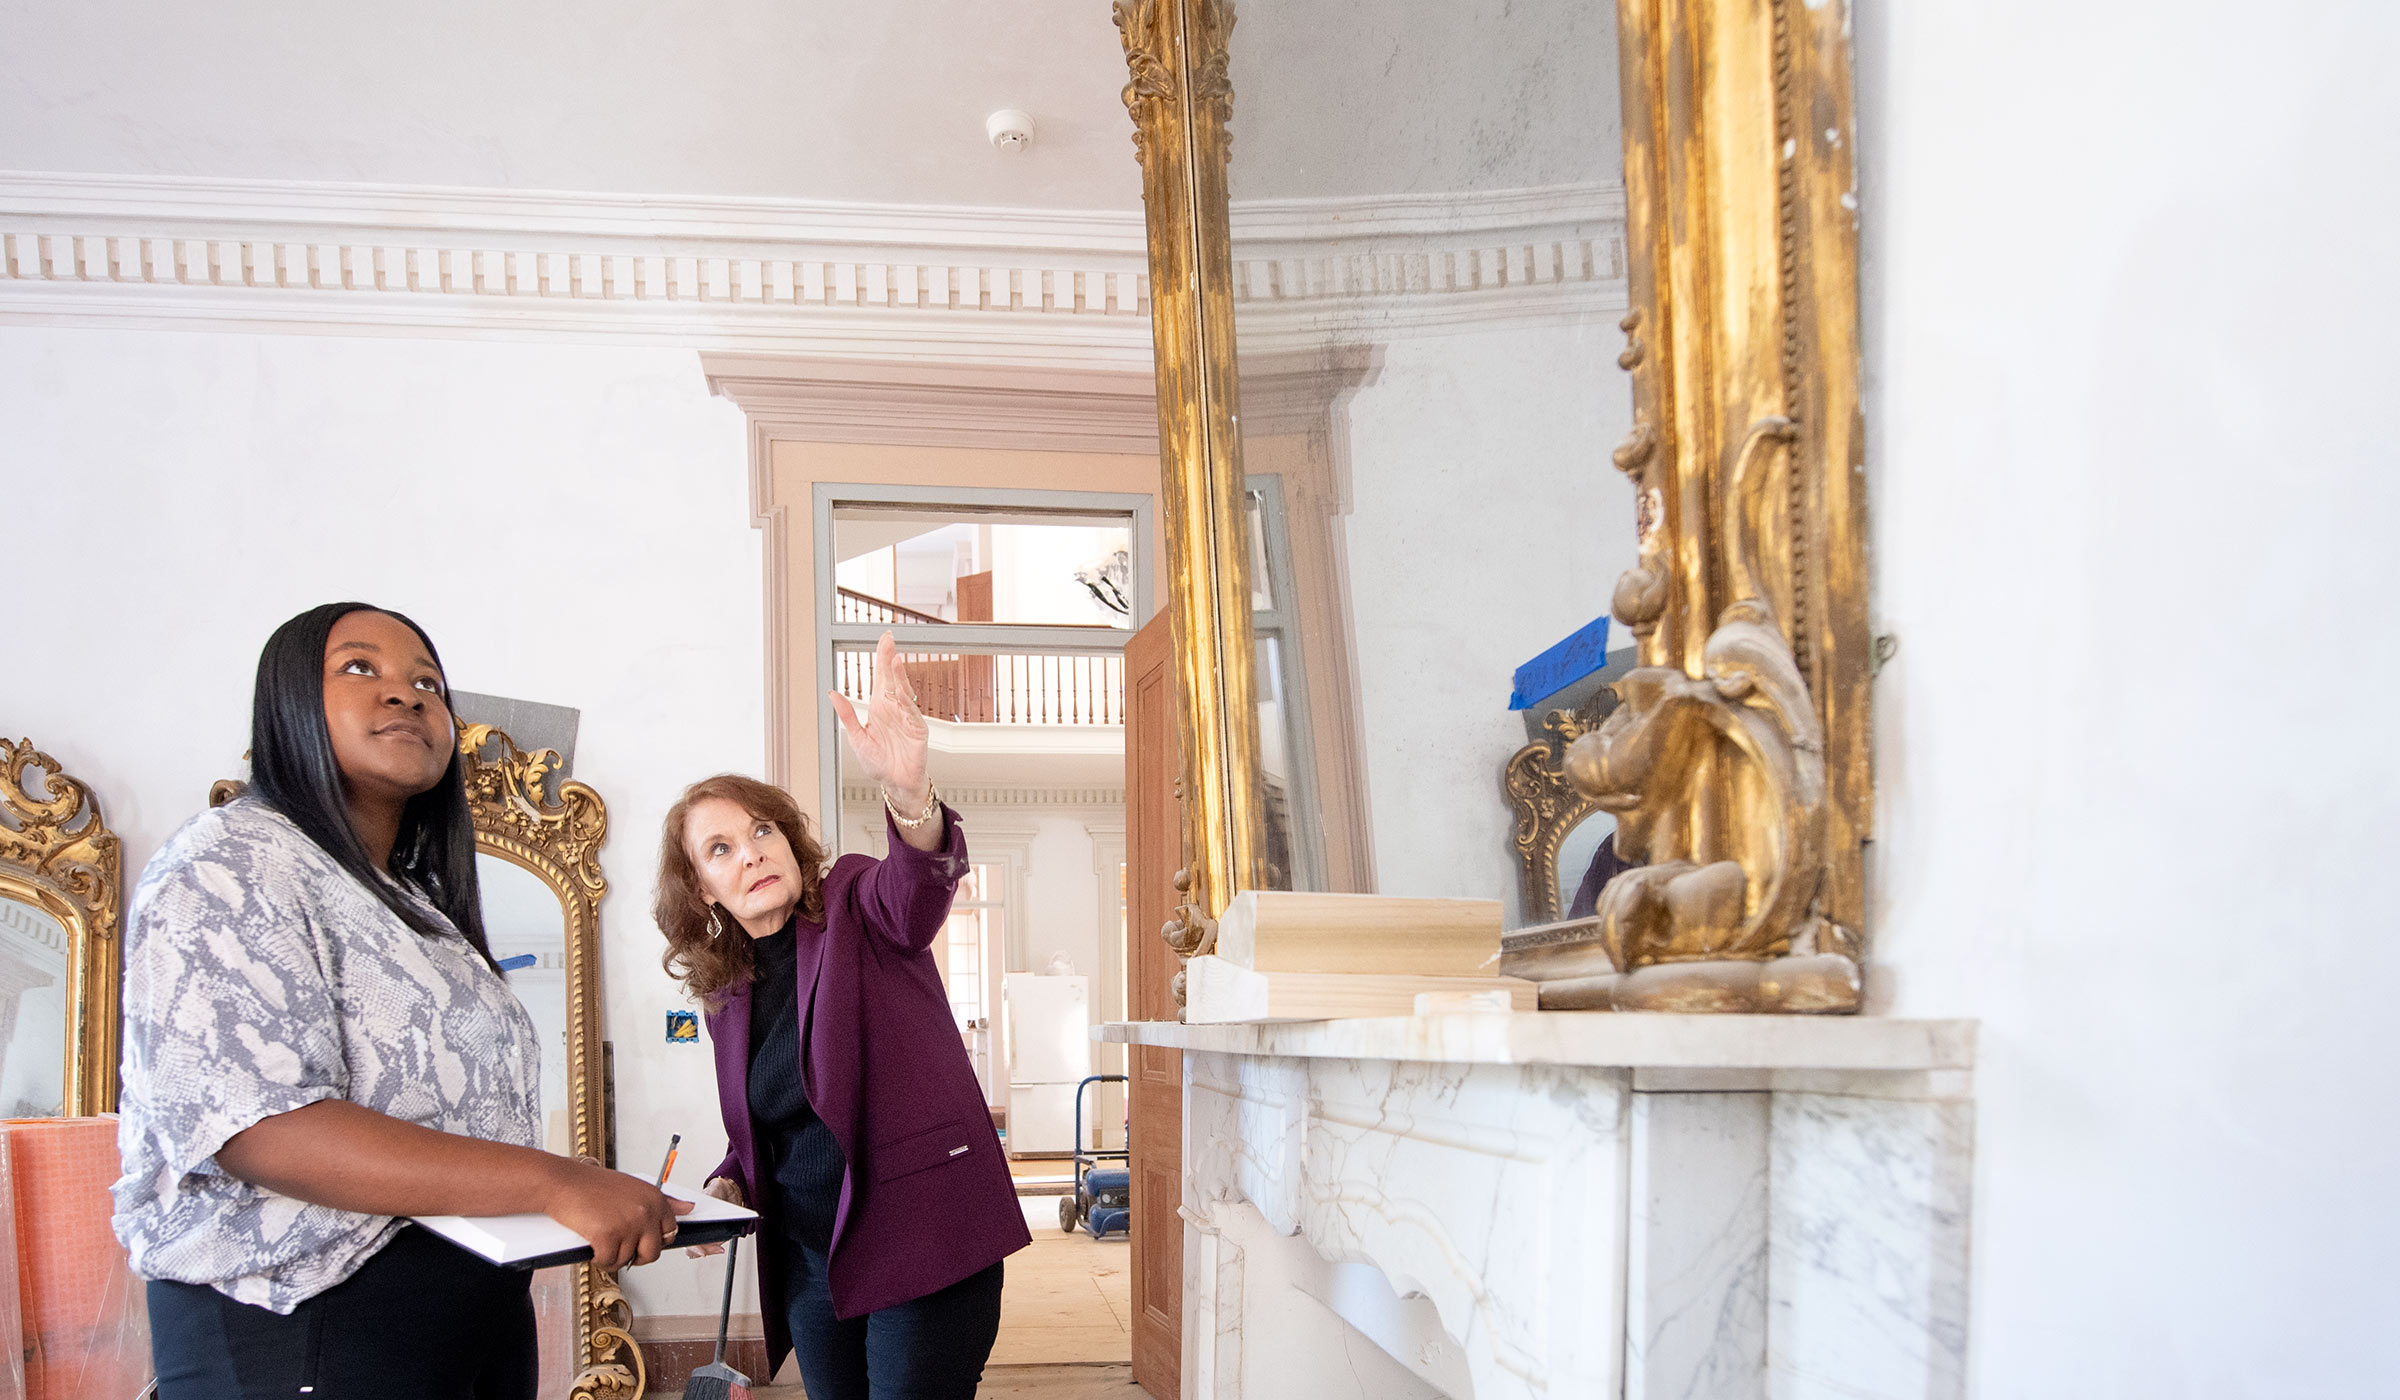 Female student and female professor in a historic house under renovation discussing a vintage mirror and molding